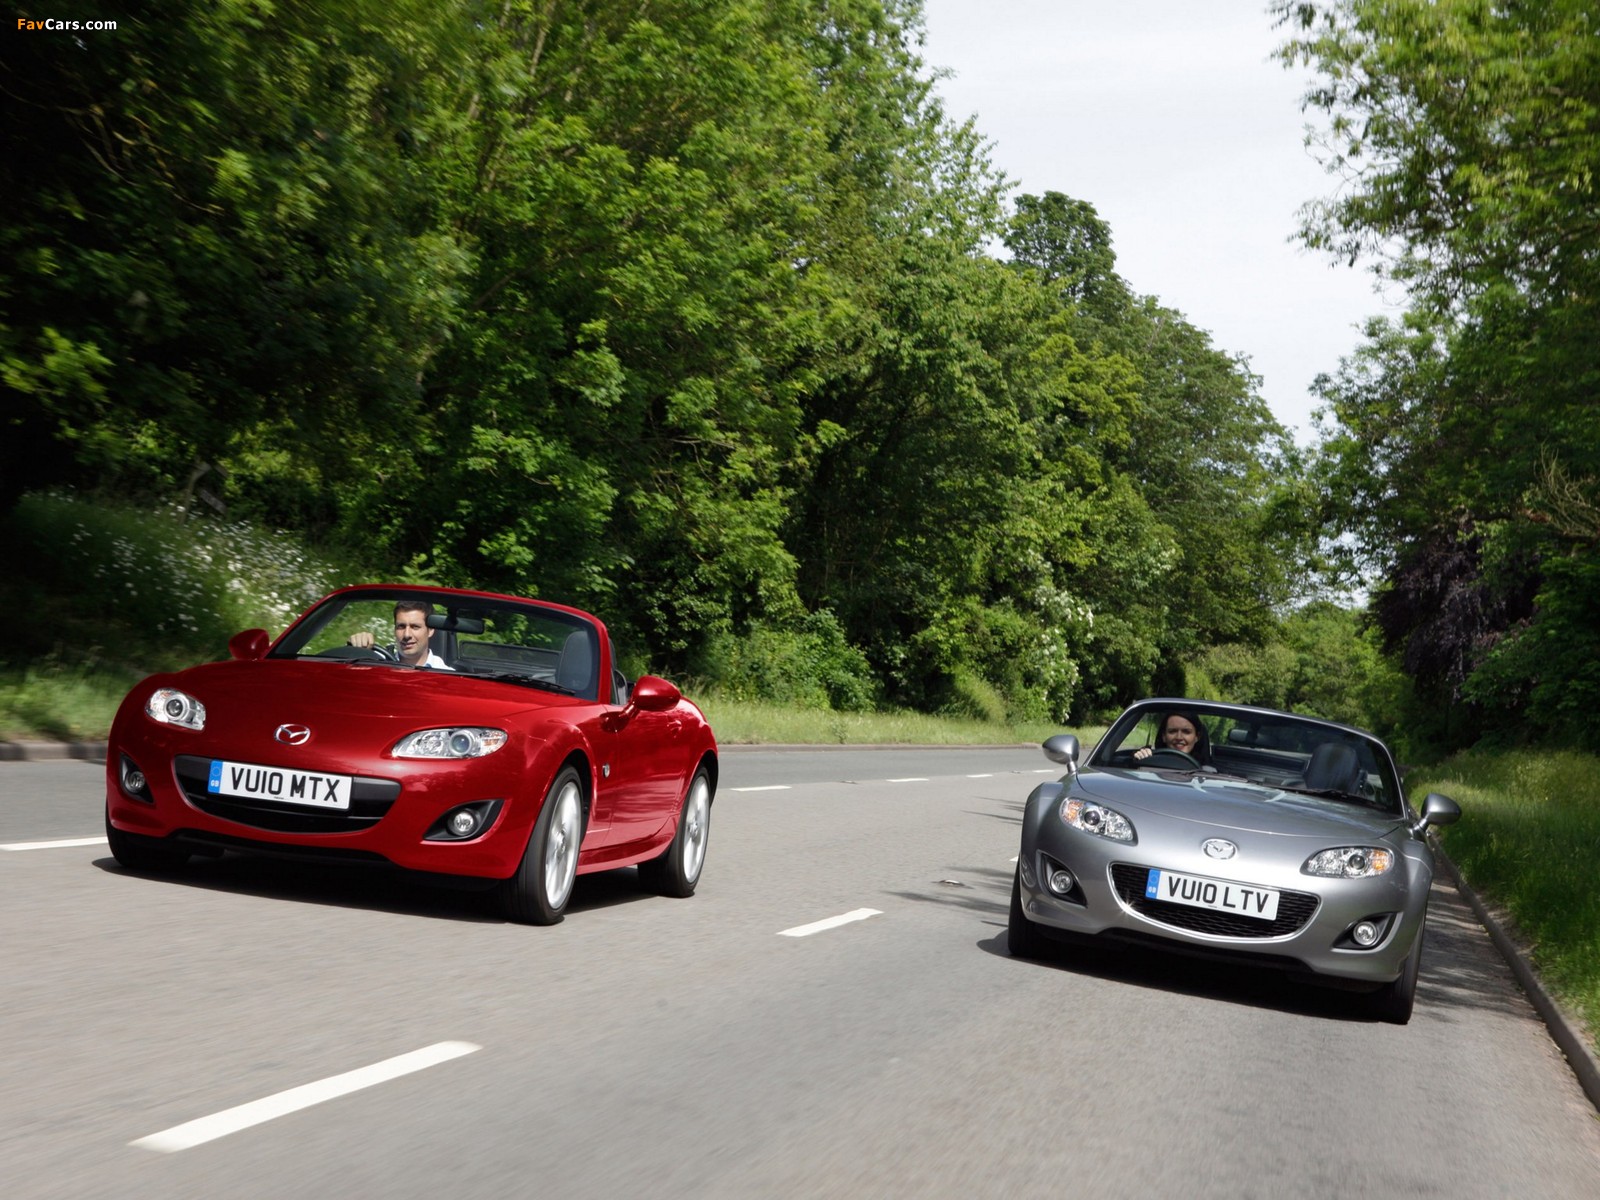 Pictures of Mazda MX-5 (1600 x 1200)